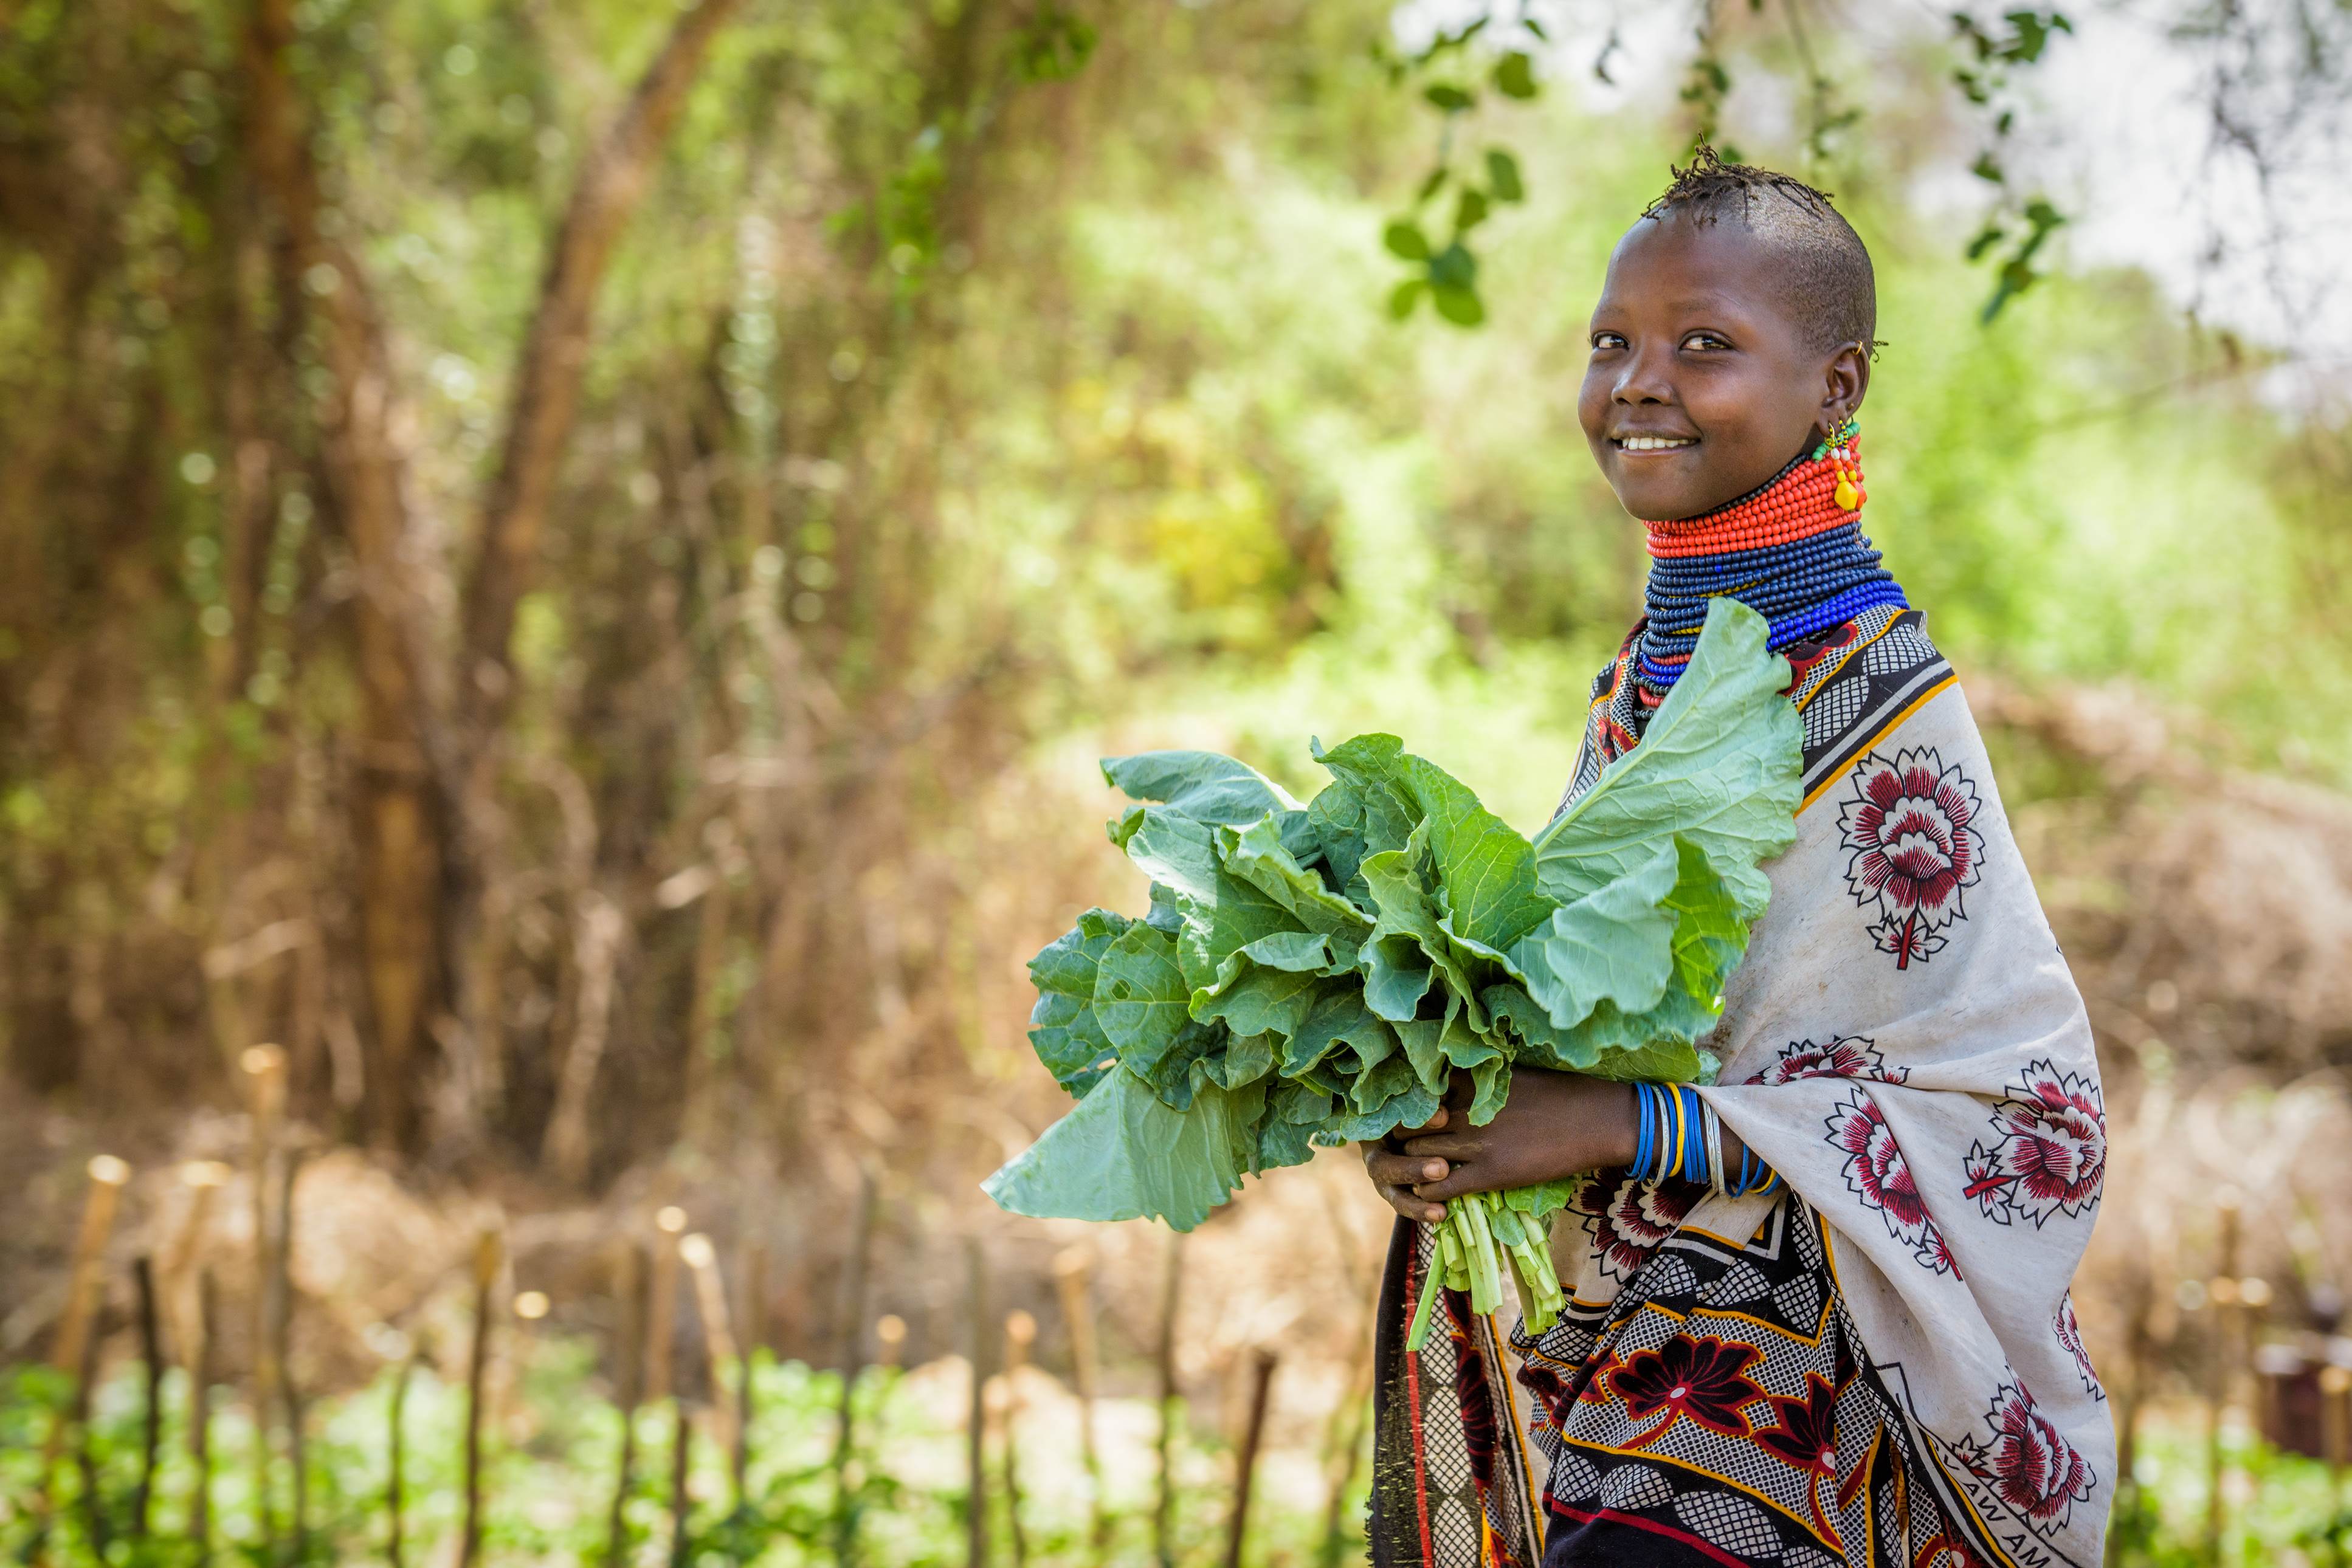 Girl in Kenya smiles as she stands in a field and holds lettuce